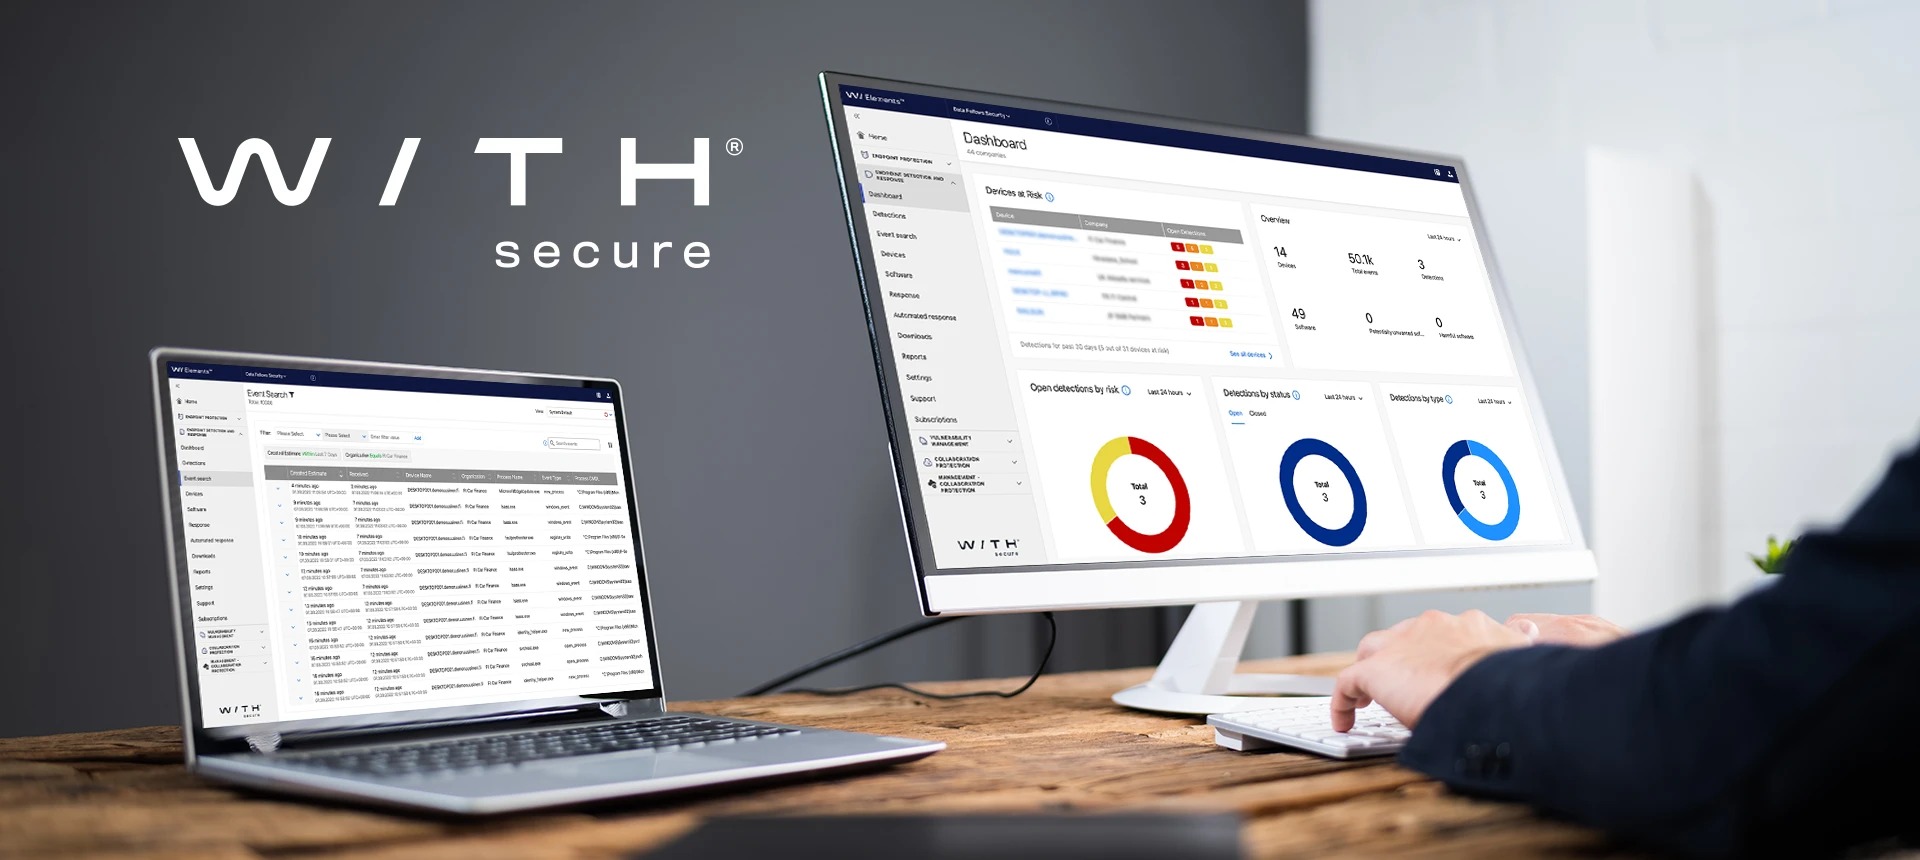 WithSecure Cloud Security Posture Management